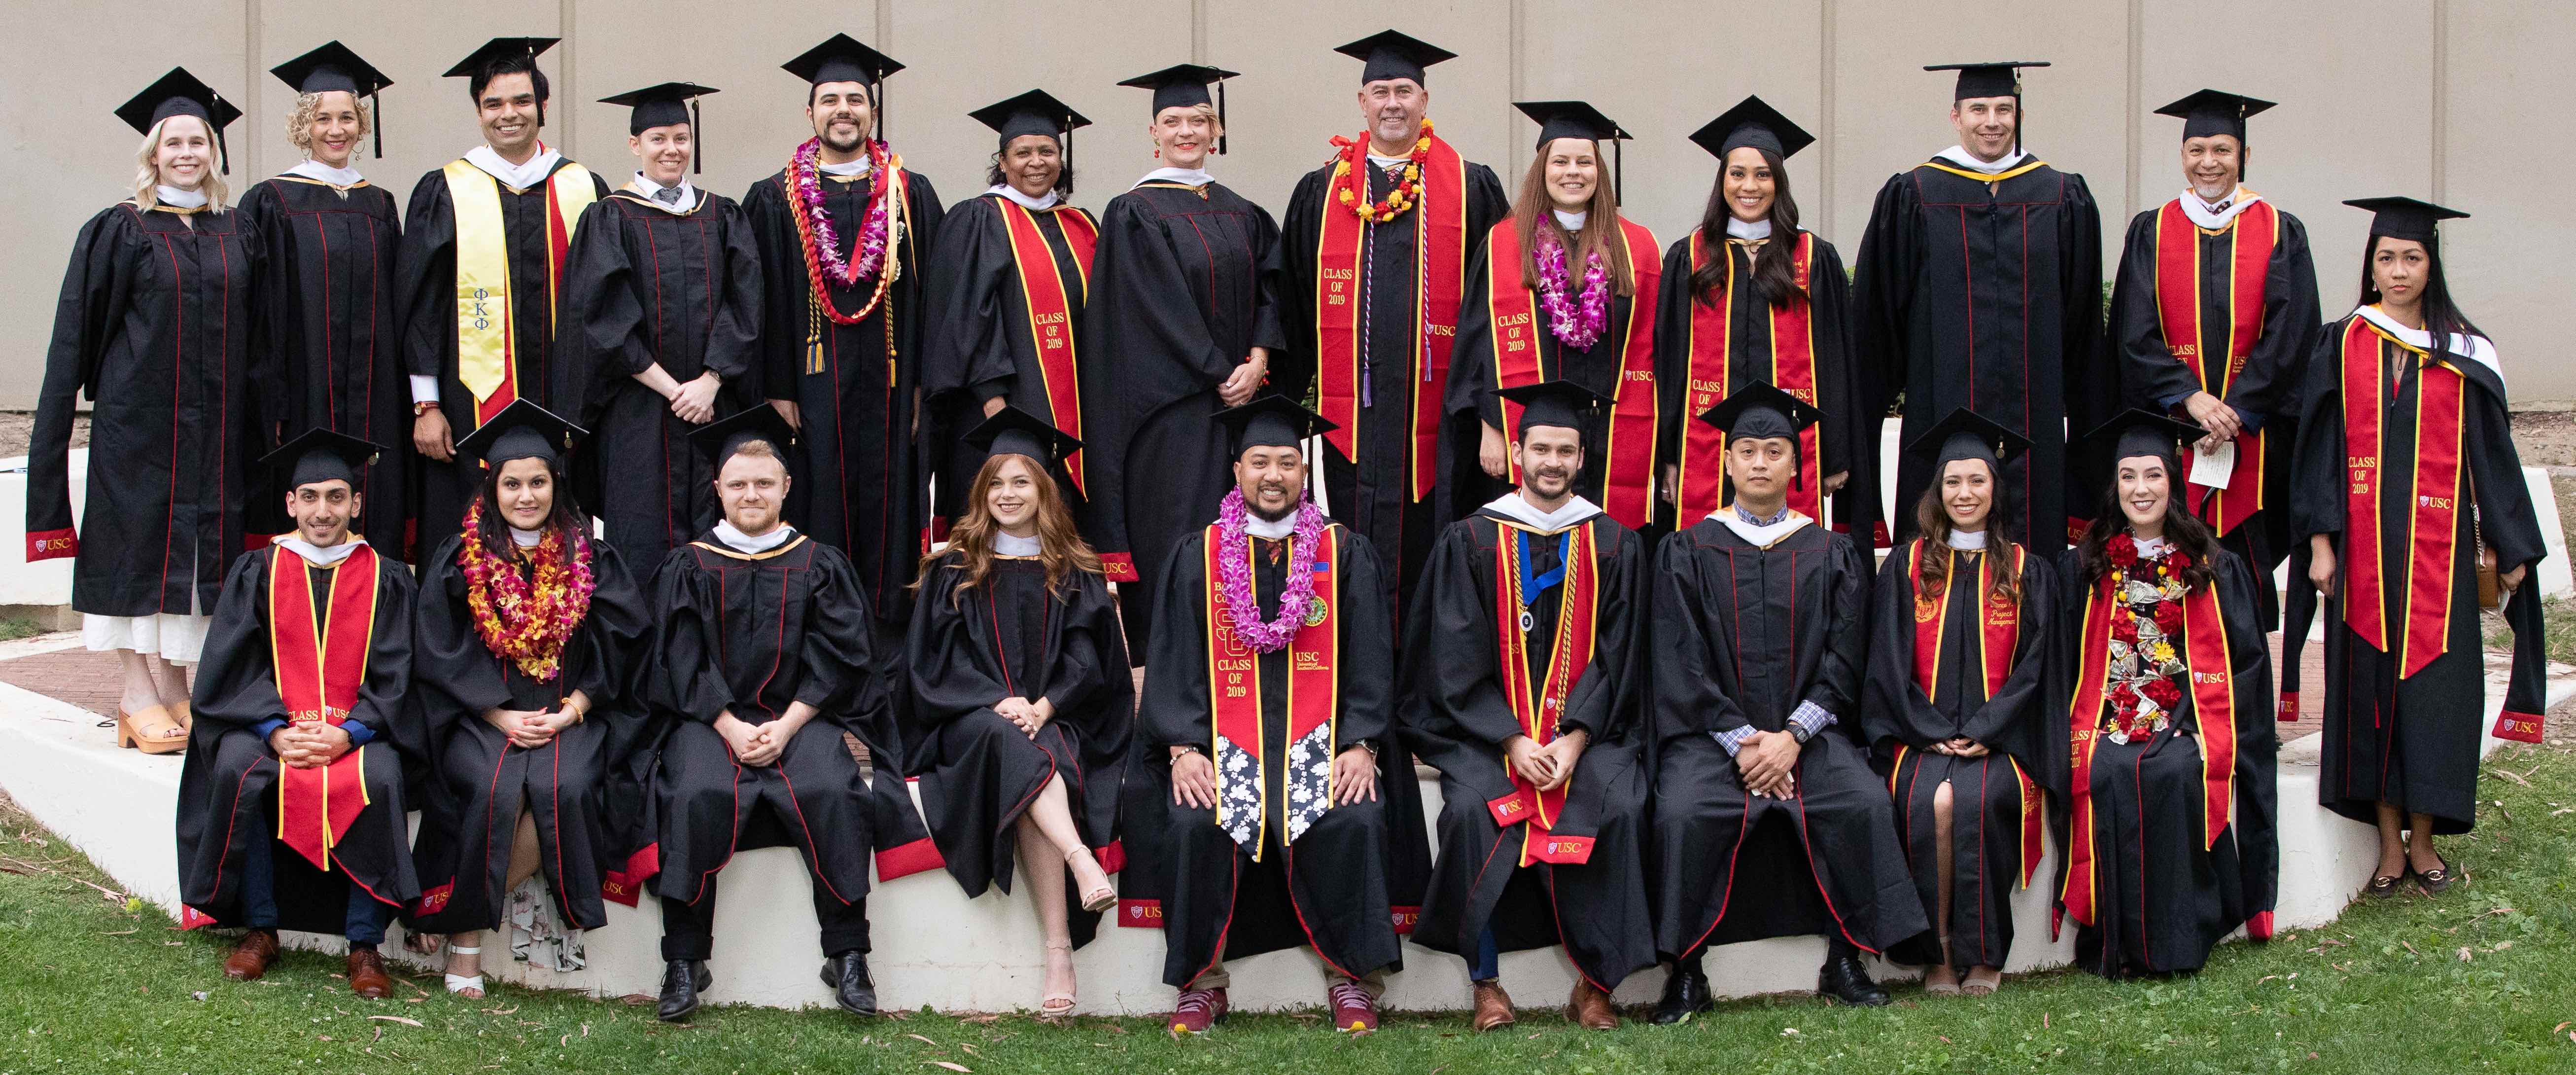 Group photo of USC Bovard College MS in Project Management graduates at commencement 